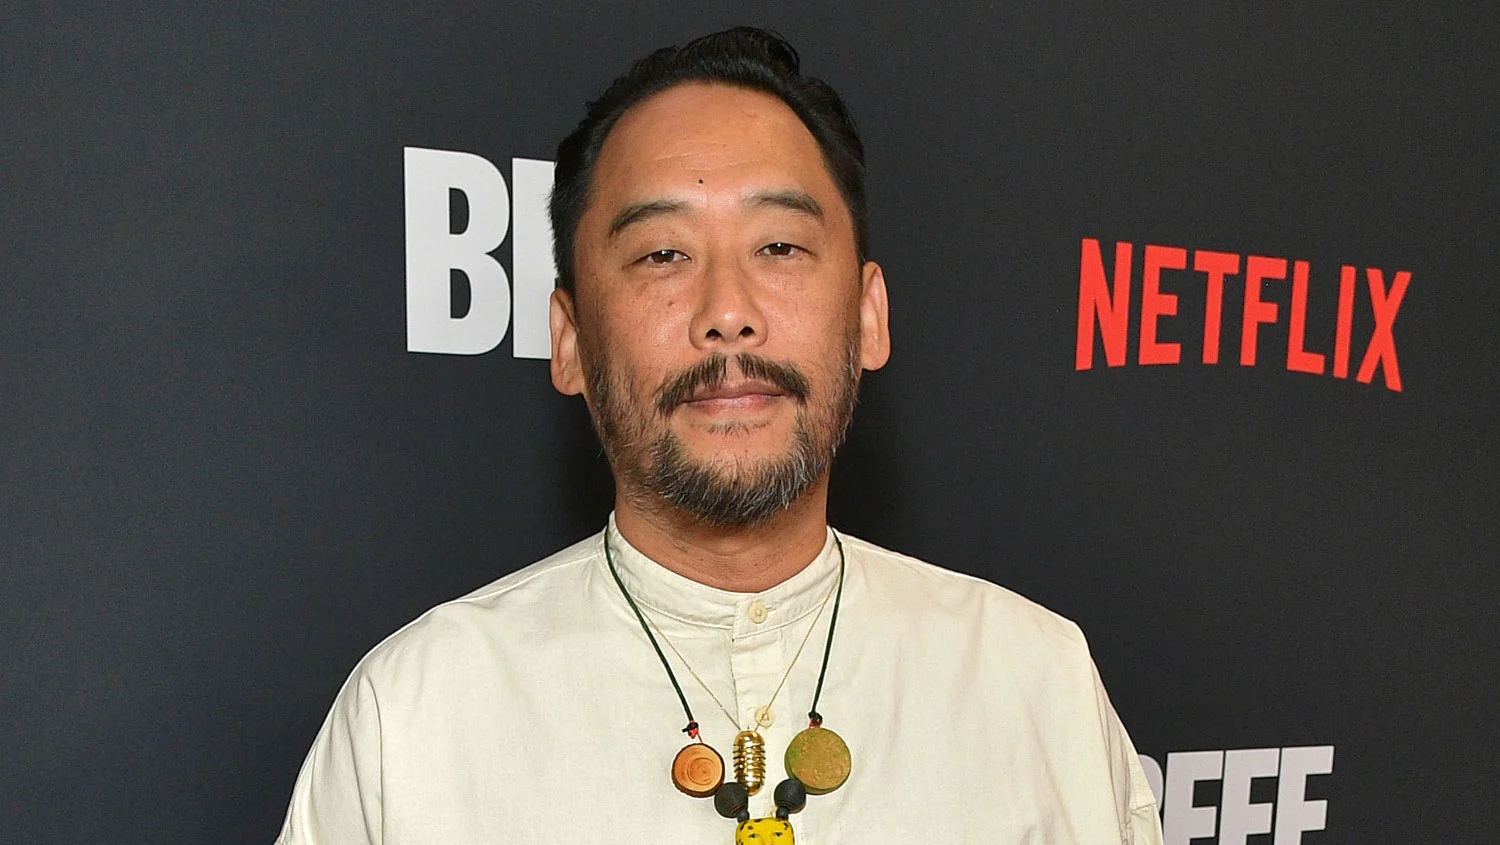 Inside the Mind of David Choe: An Artist and Entrepreneur's Journey to Wealth